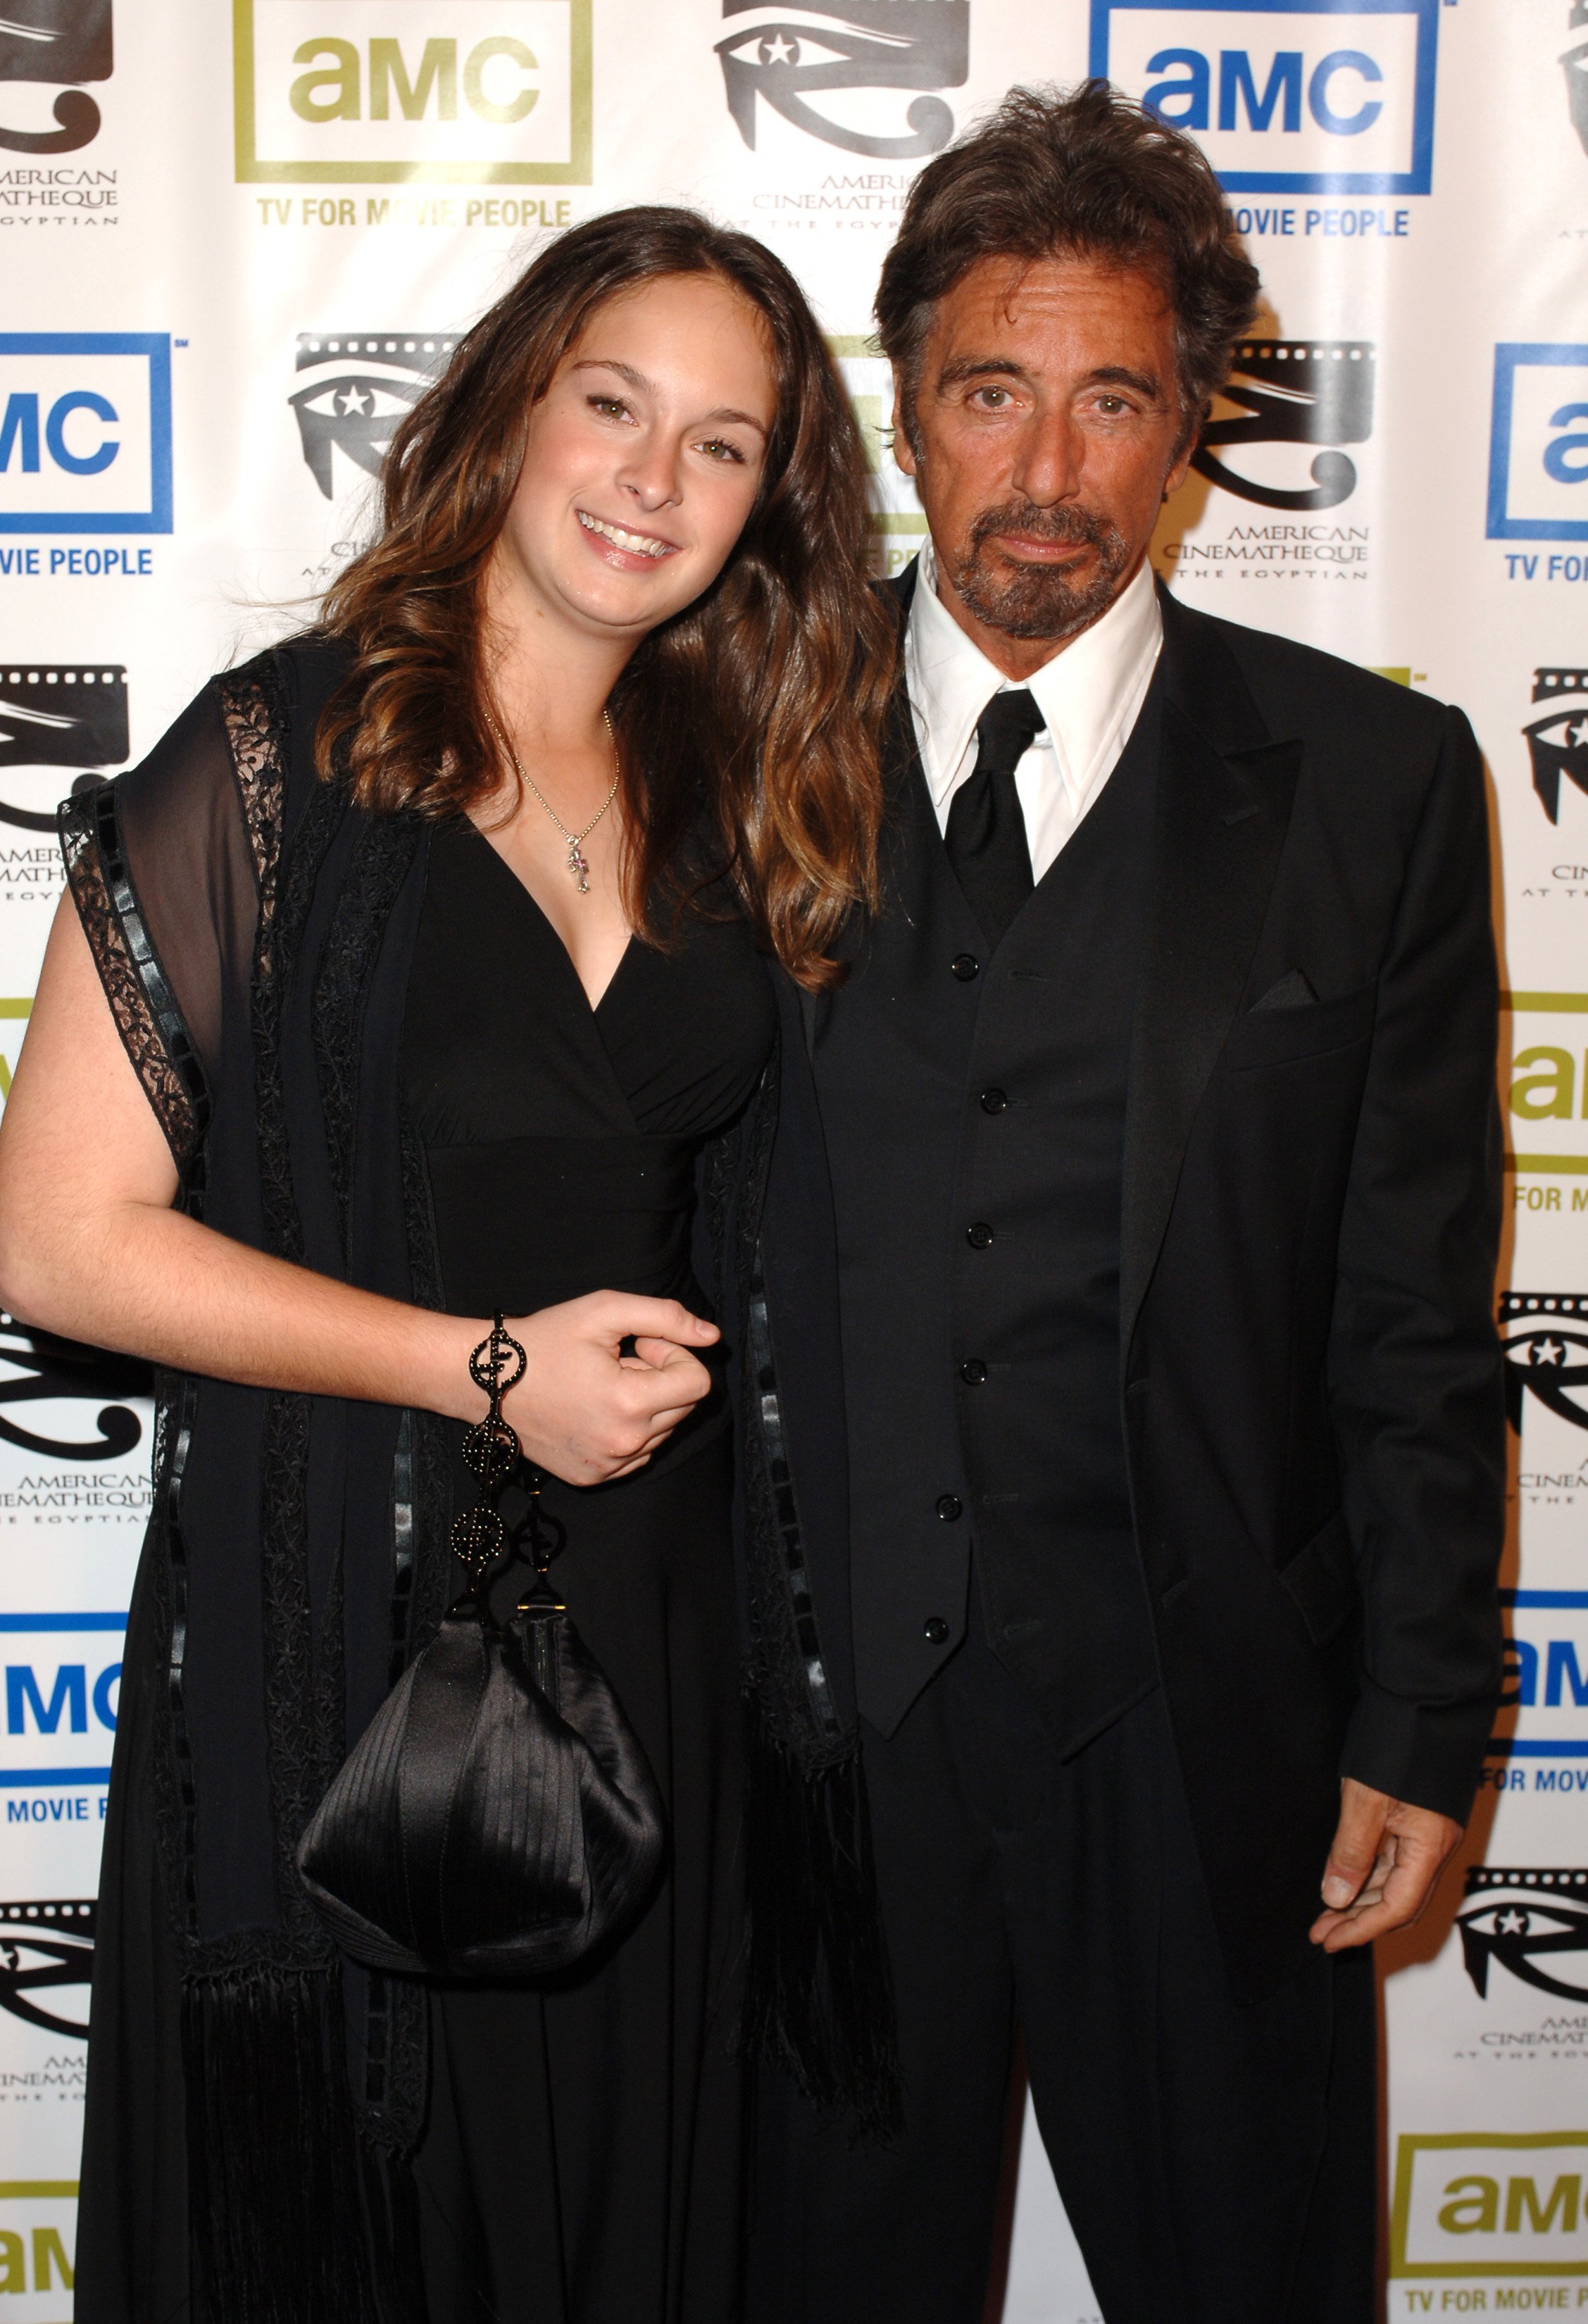 Al Pacino and daughter Julie Pacino during 20th Annual American Cinematheque Award Honoring Al Pacino - Arrivals at Beverly Hilton Hotel in Beverly Hills, California, United States. | Source: Getty Images